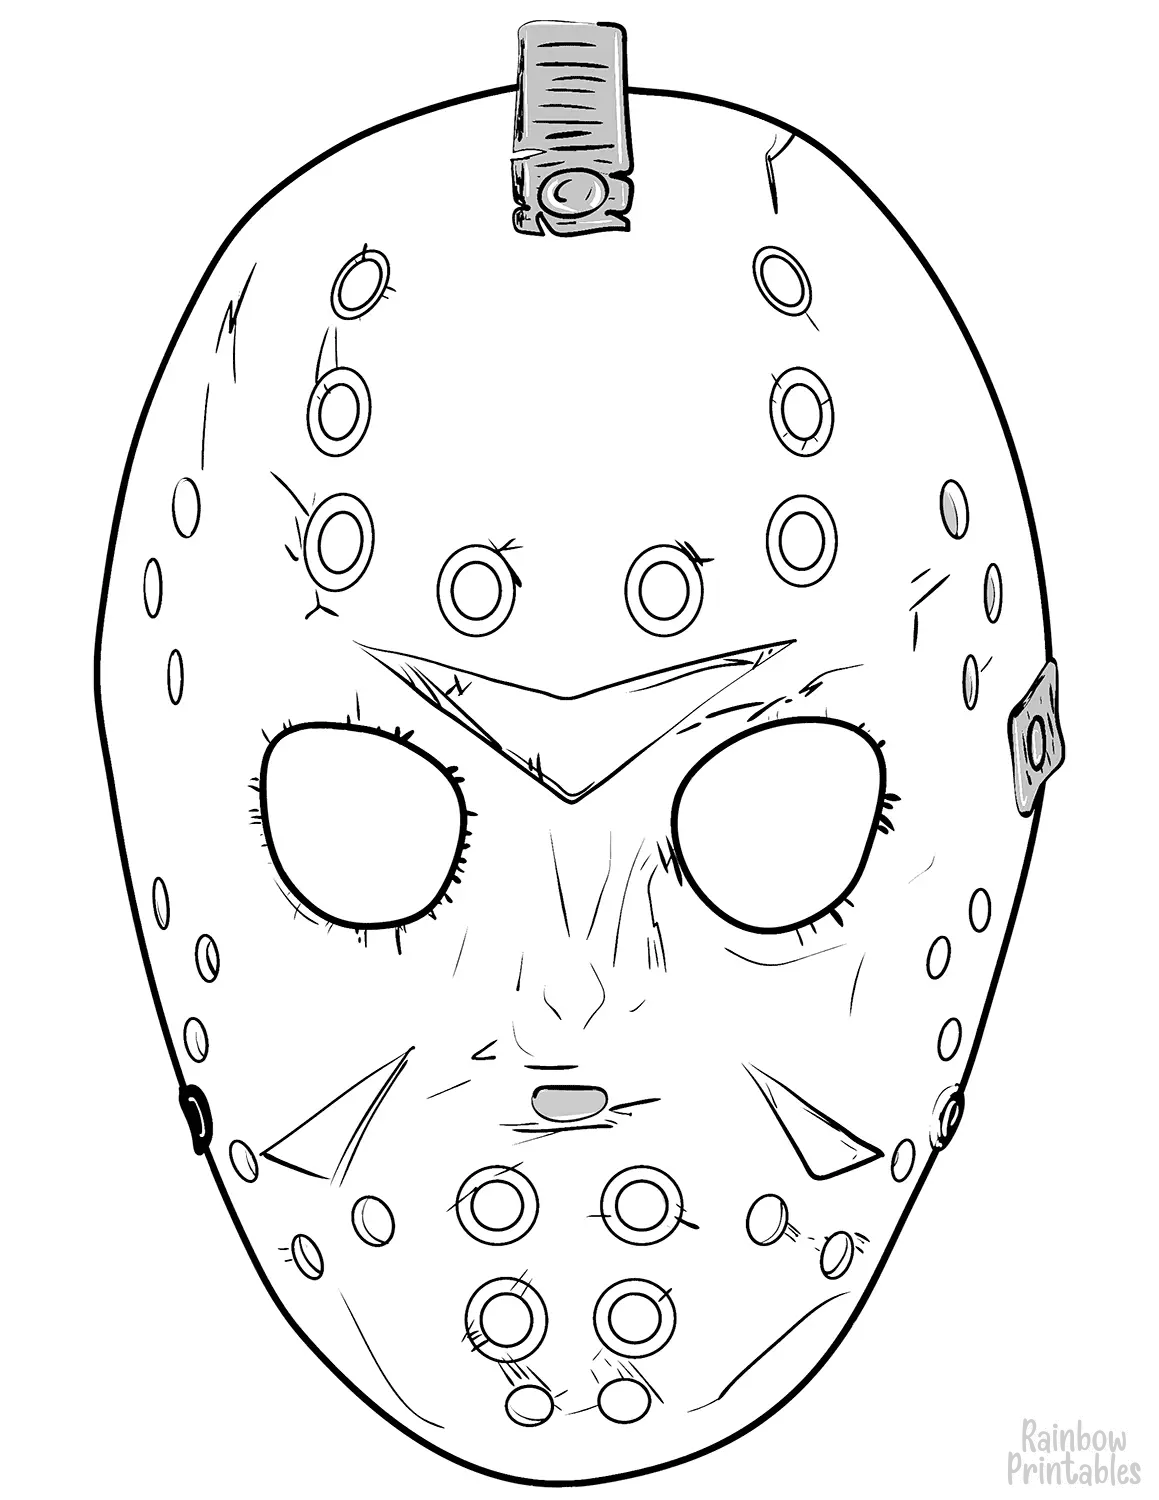 FRIDAY JASON 13th MASKS Halloween Line Art Drawing Set Free Activity Coloring Pages for Kids-02